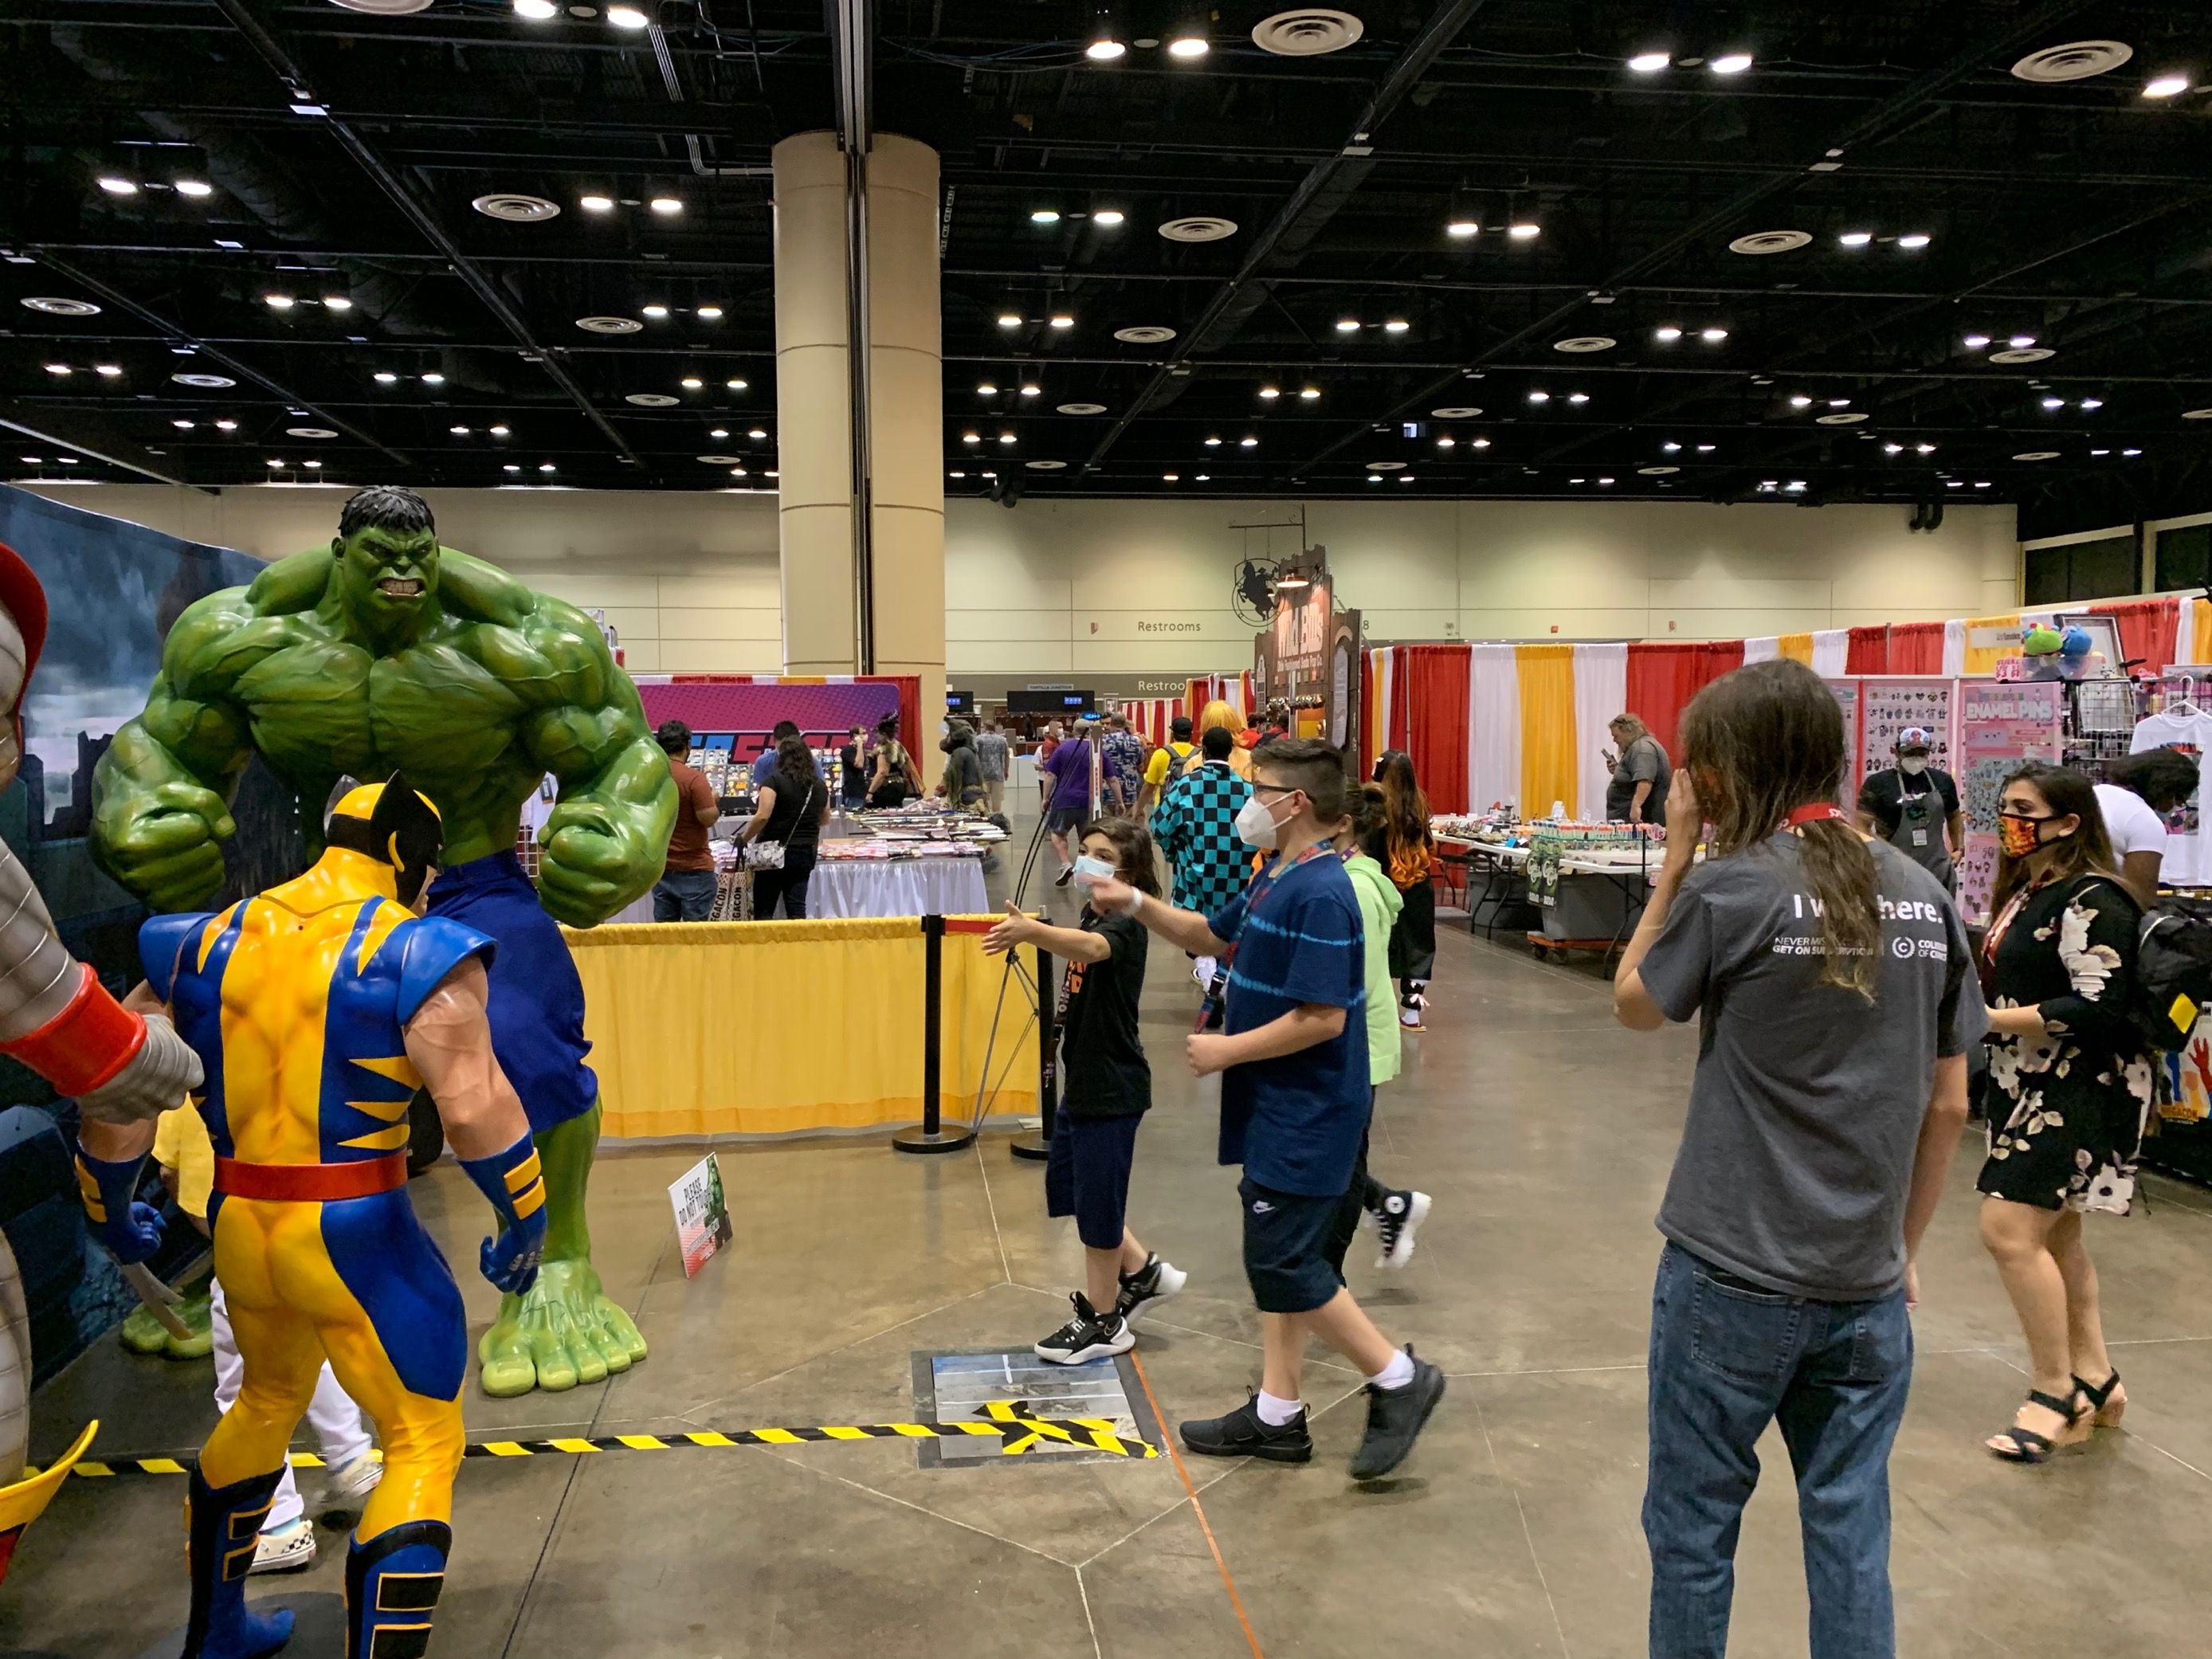 Megacon 2022 Schedule Megacon Orlando Returns. Here Are 9 Things You Need To Know – Wftv